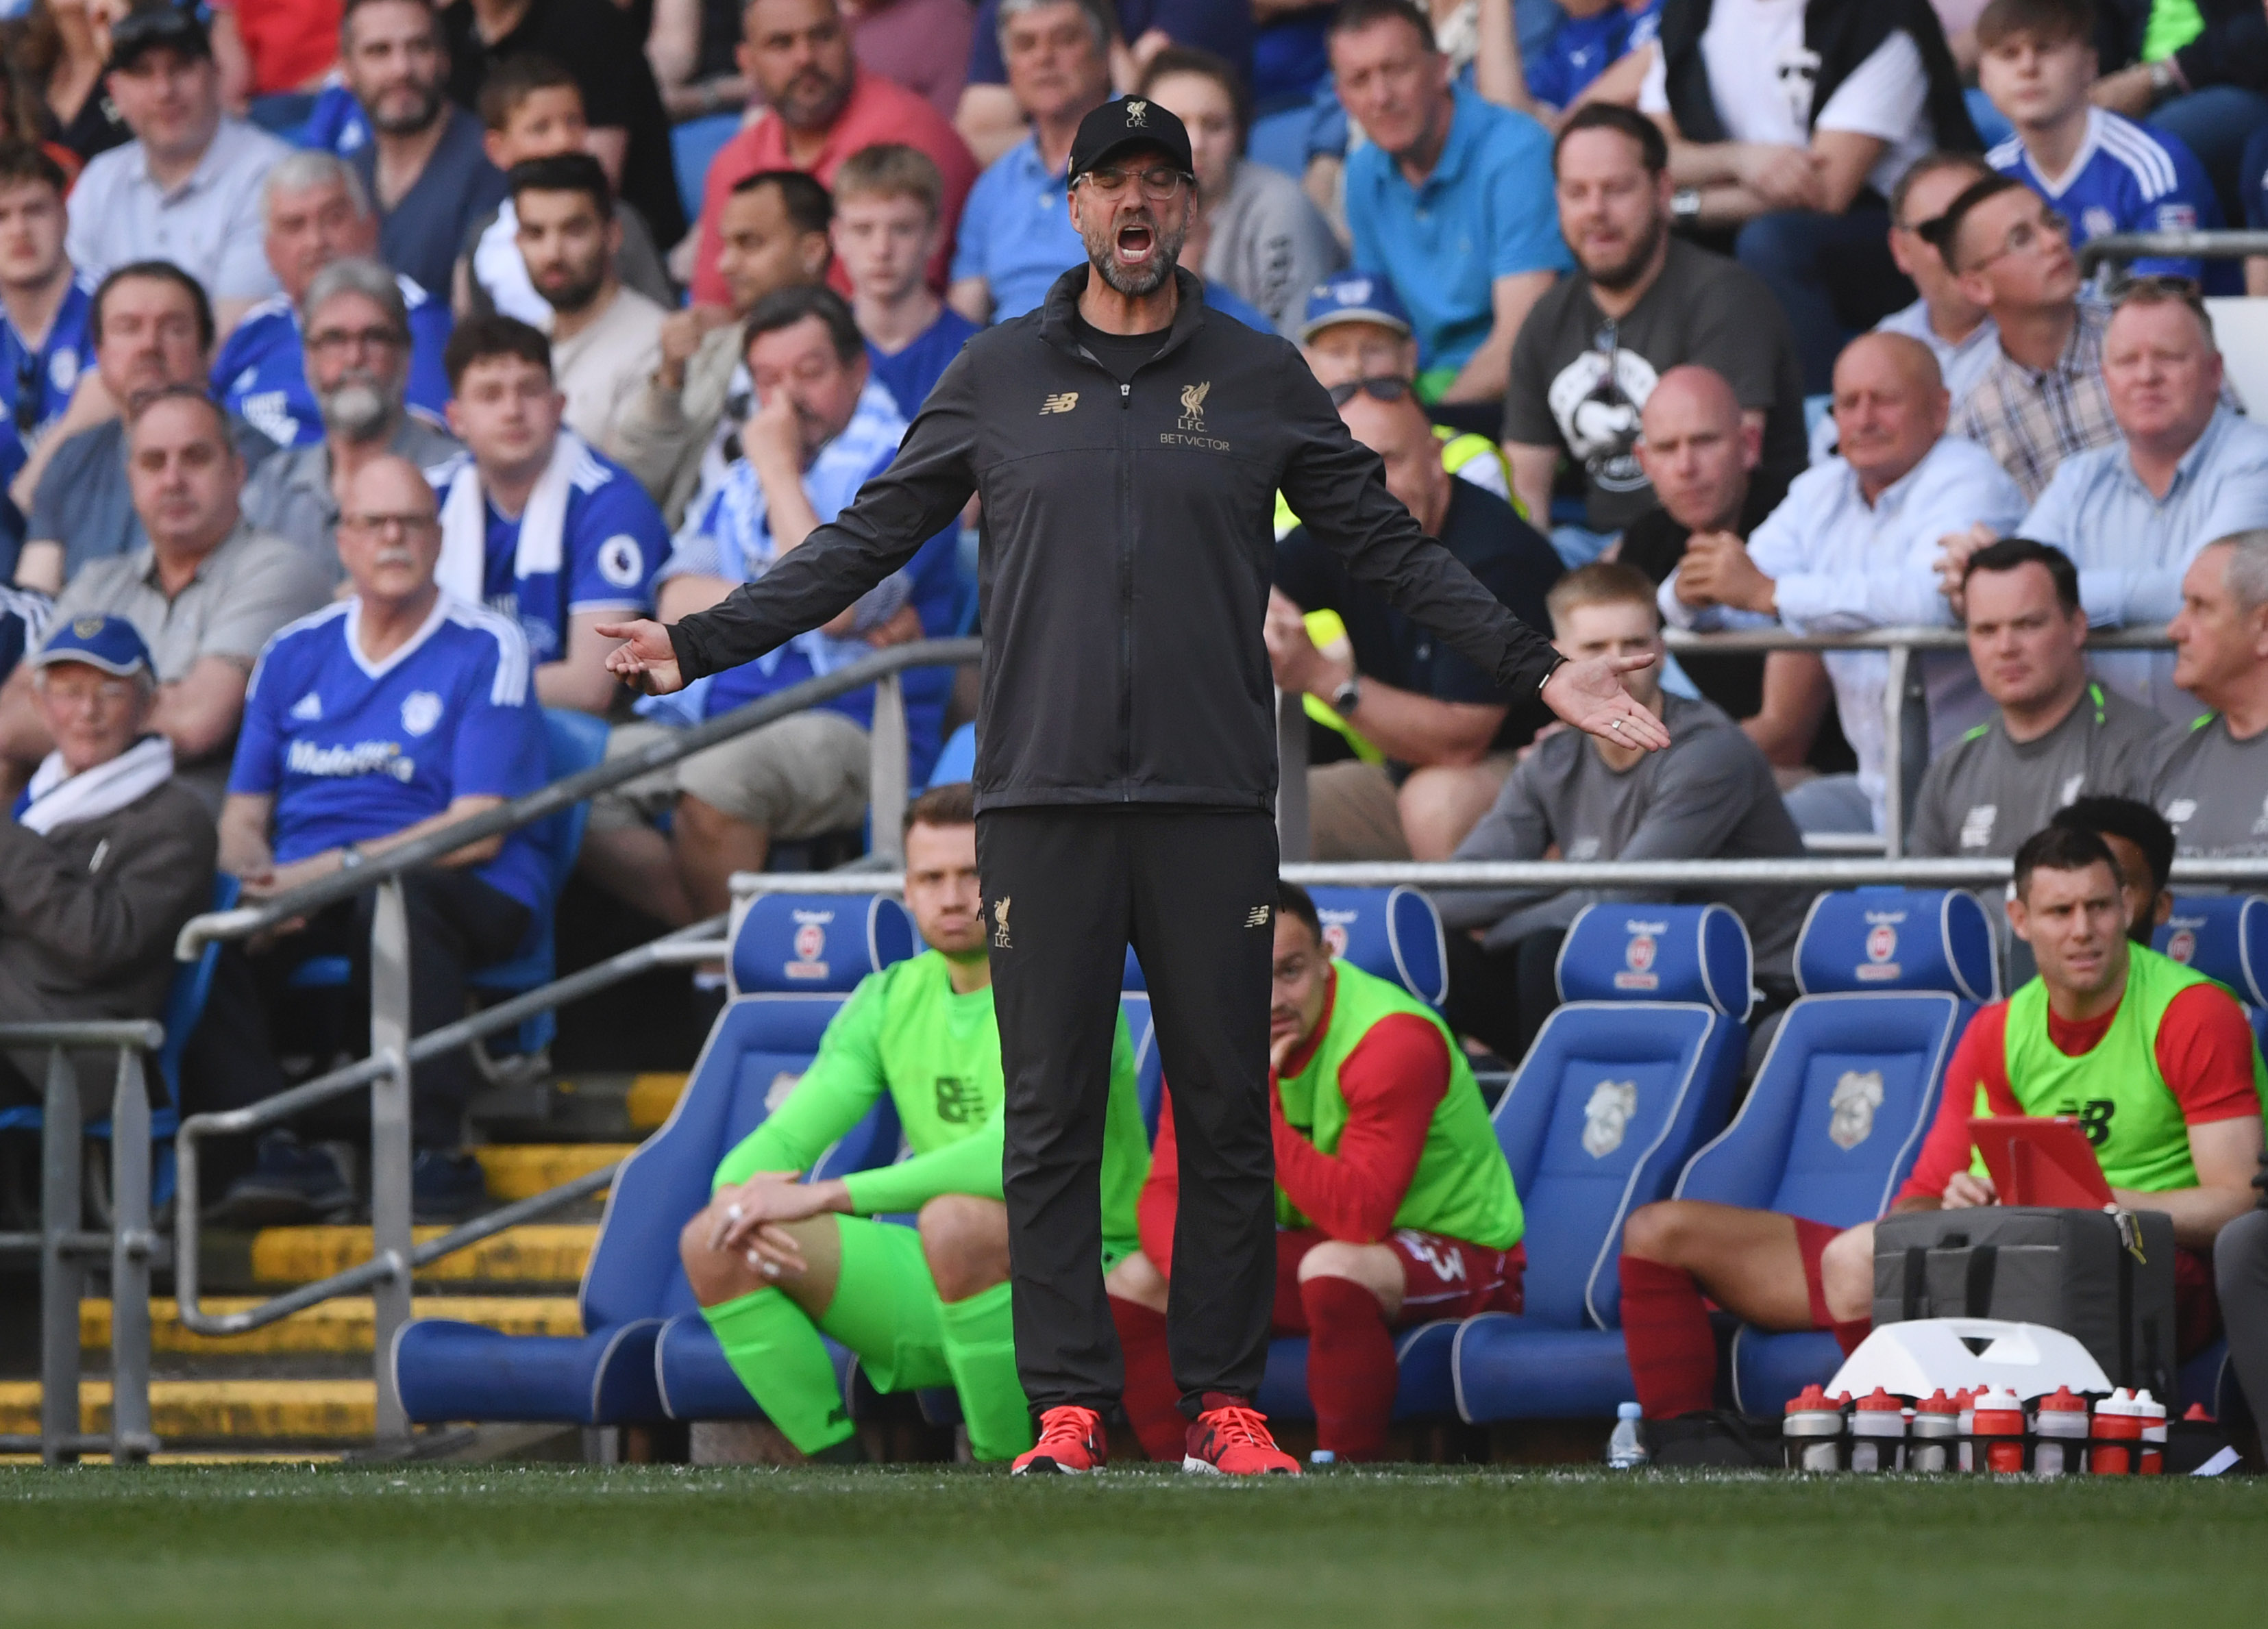 CARDIFF, WALES - APRIL 21:  Jurgen Klopp, Manager of Liverpool reacts during the Premier League match between Cardiff City and Liverpool FC at Cardiff City Stadium on April 21, 2019 in Cardiff, United Kingdom. (Photo by Stu Forster/Getty Images)